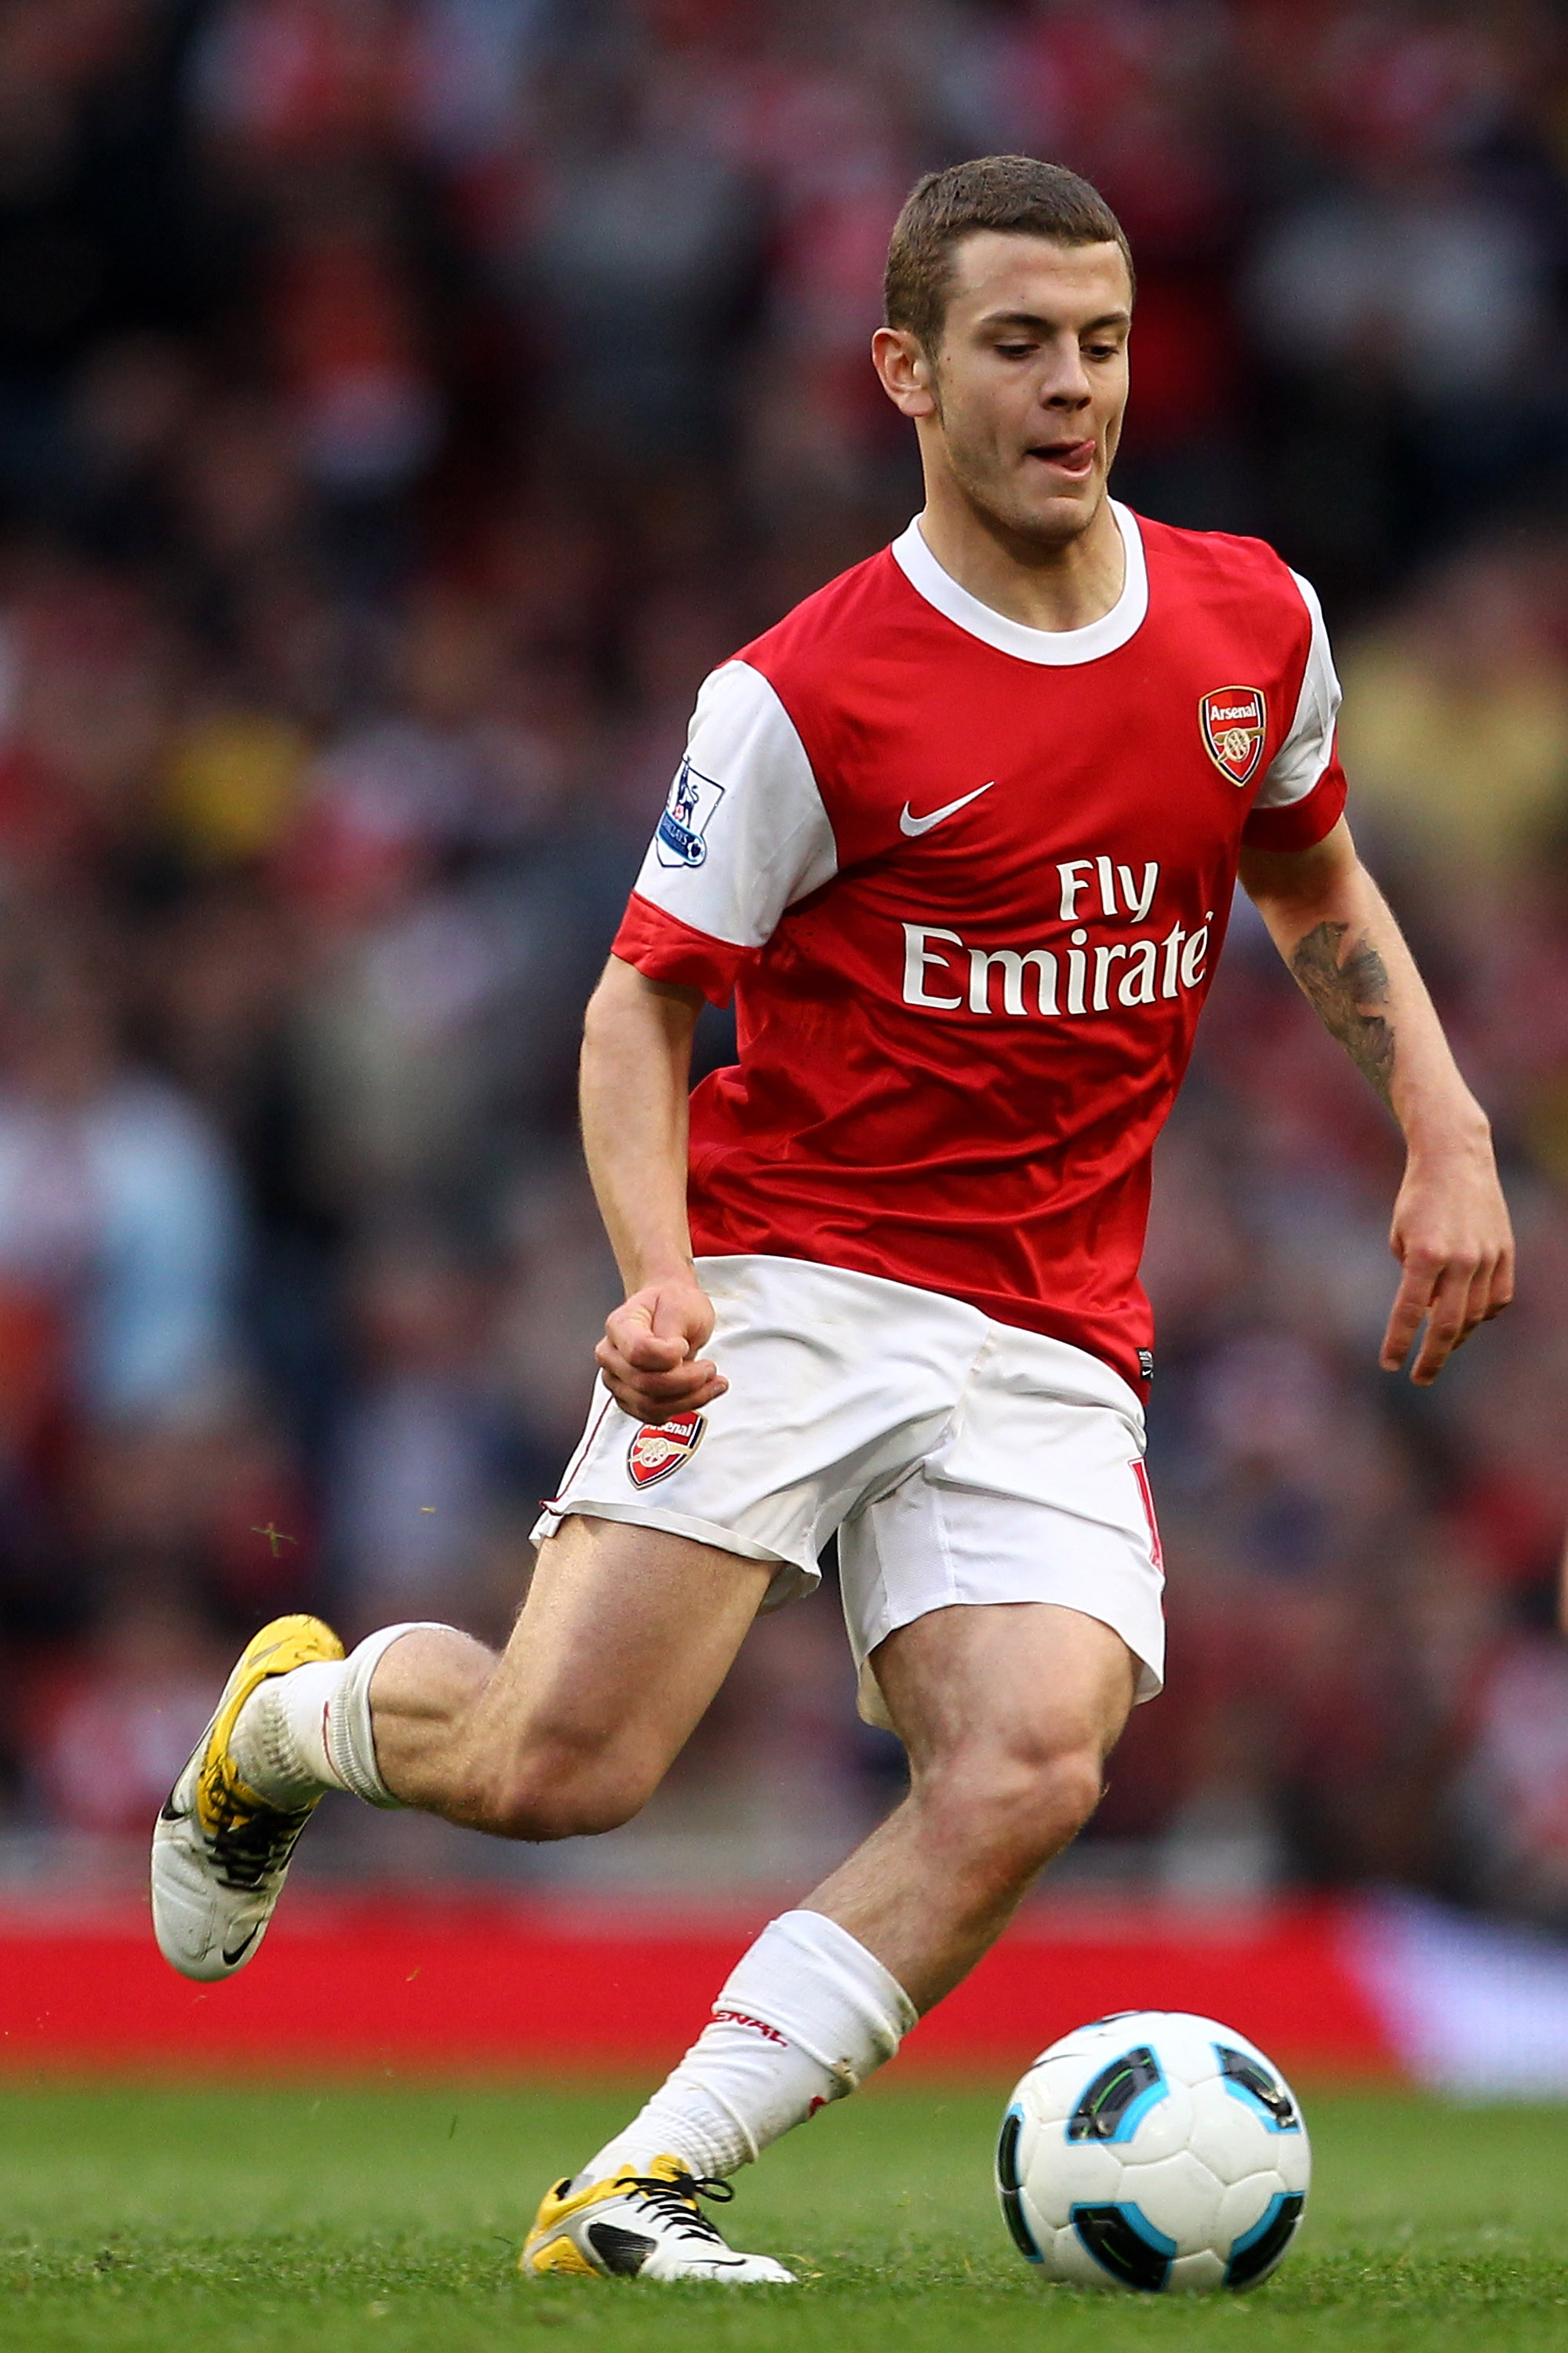 LONDON, ENGLAND - APRIL 02:  Jack Wilshere of Arsenal on the ball during the Barclays Premier League match between Arsenal and Blackburn Rovers at the Emirates Stadium on April 2, 2011 in London, England.  (Photo by Julian Finney/Getty Images)